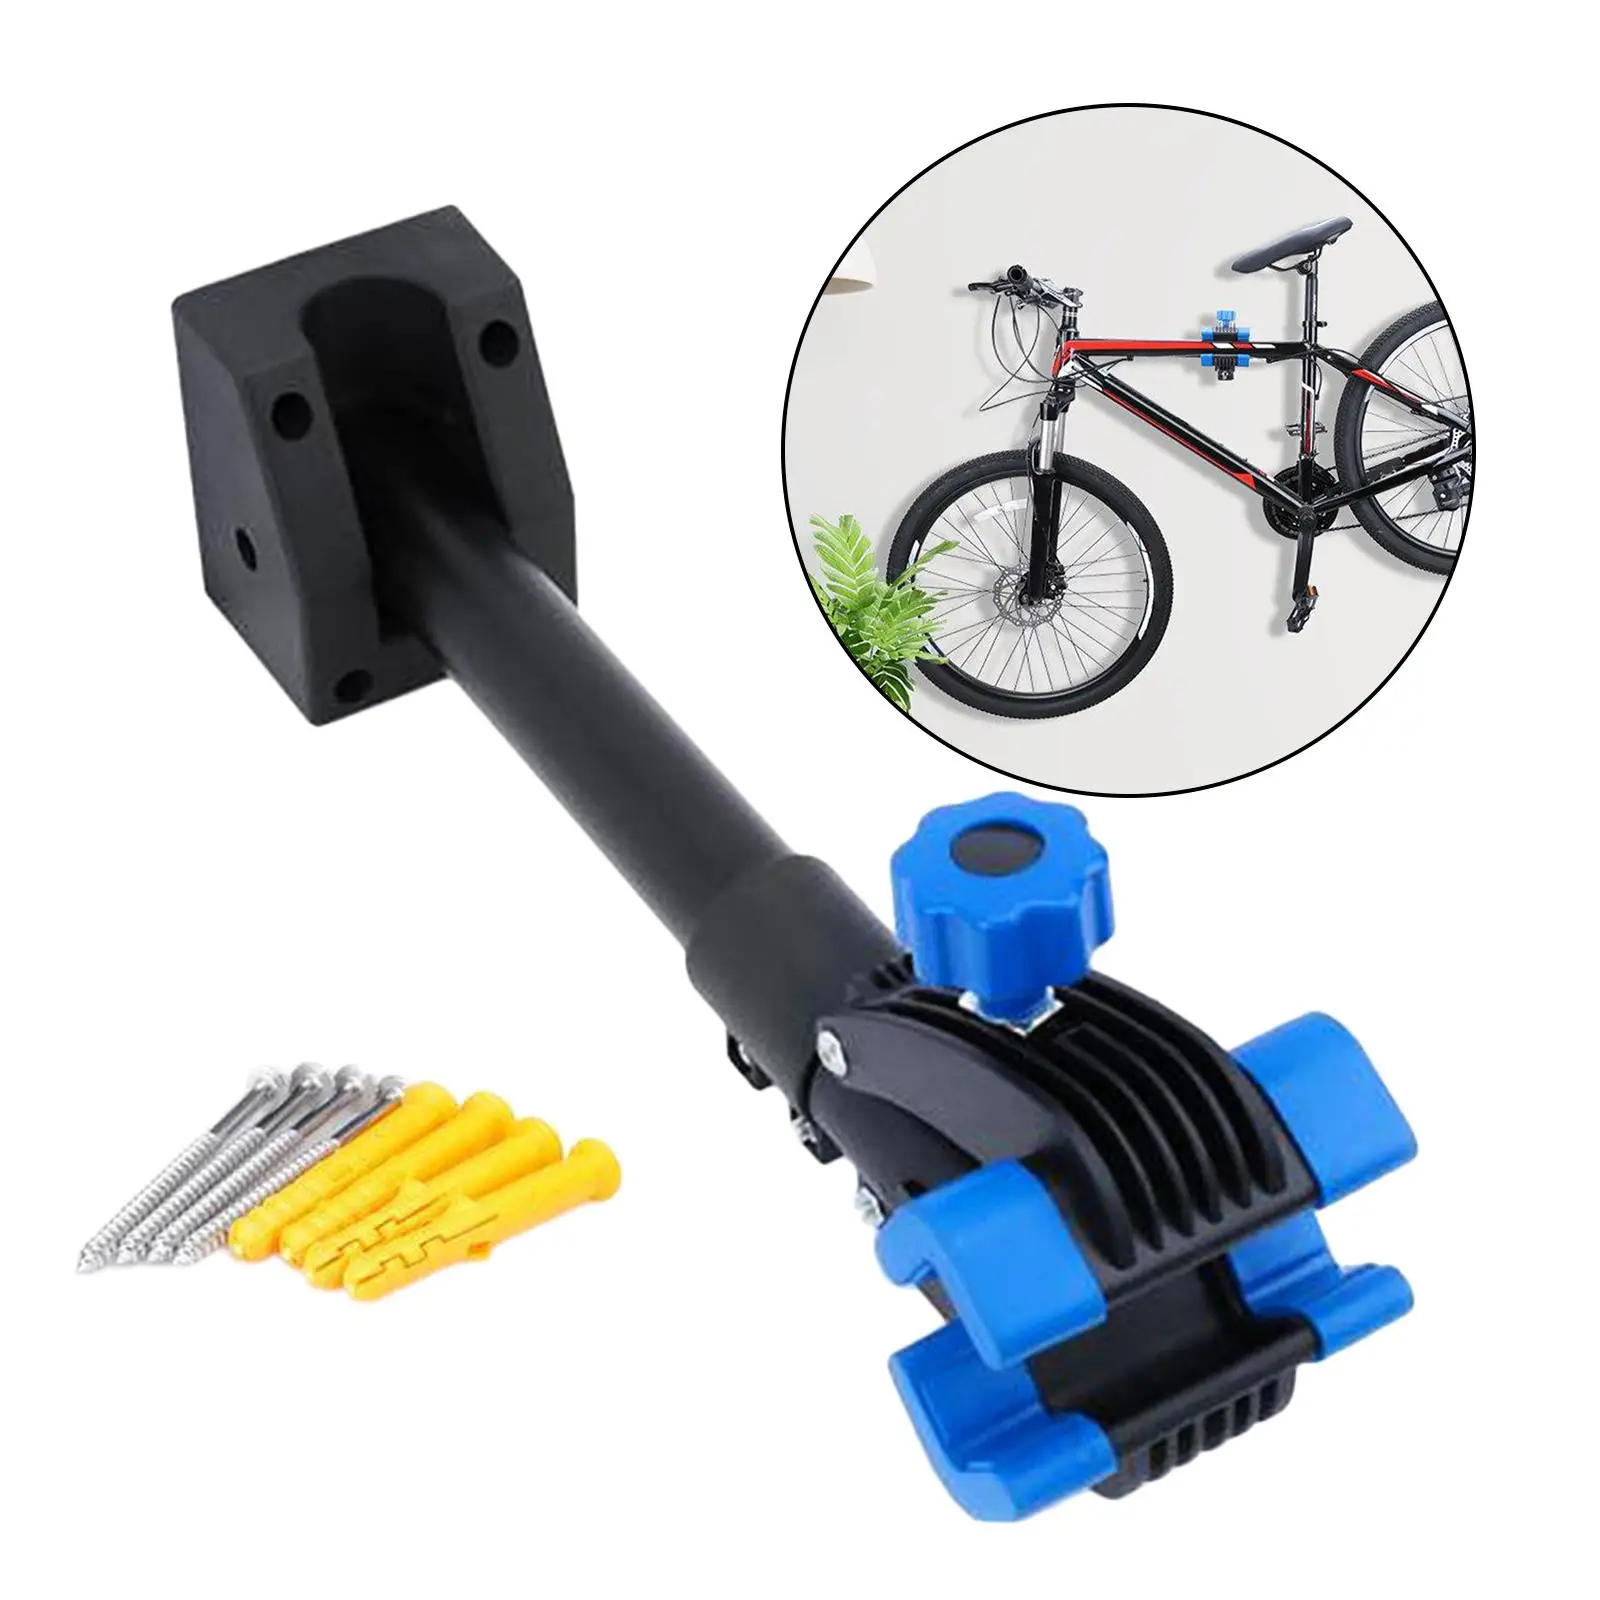 Folding Bike Wall Mount Bicycle Stand Clamp Clip Workstand Home Storage Hanger Holder Mechanic Tool